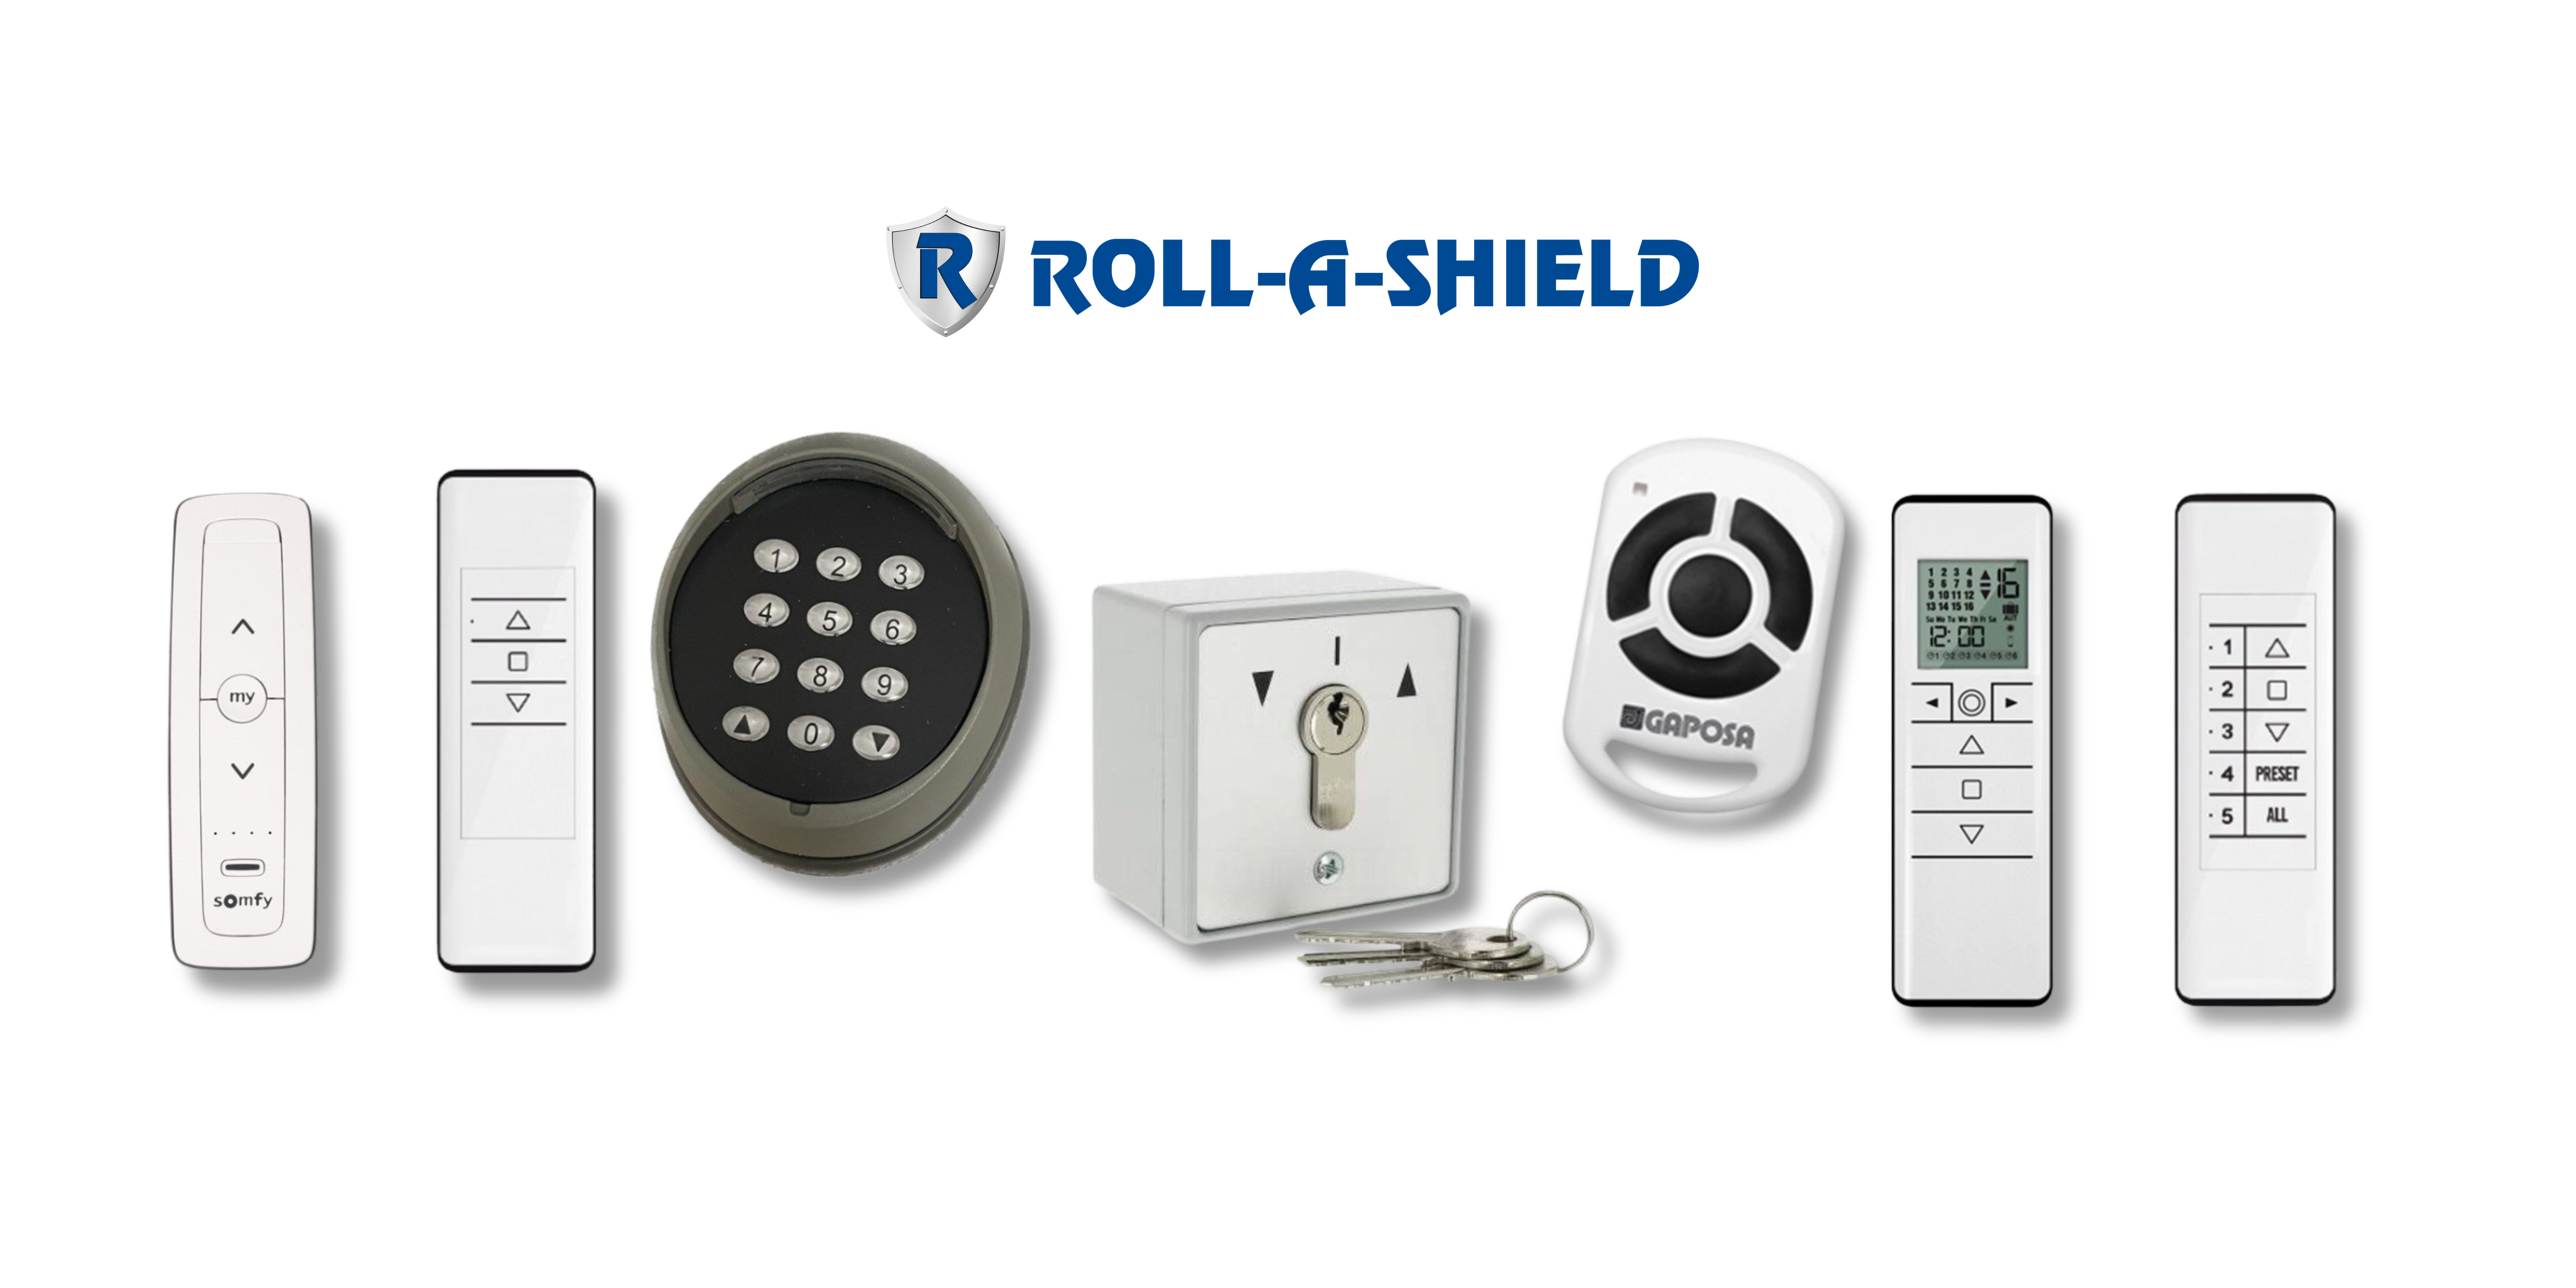 An image showing Roll-A-Shield's rolling shutter access options